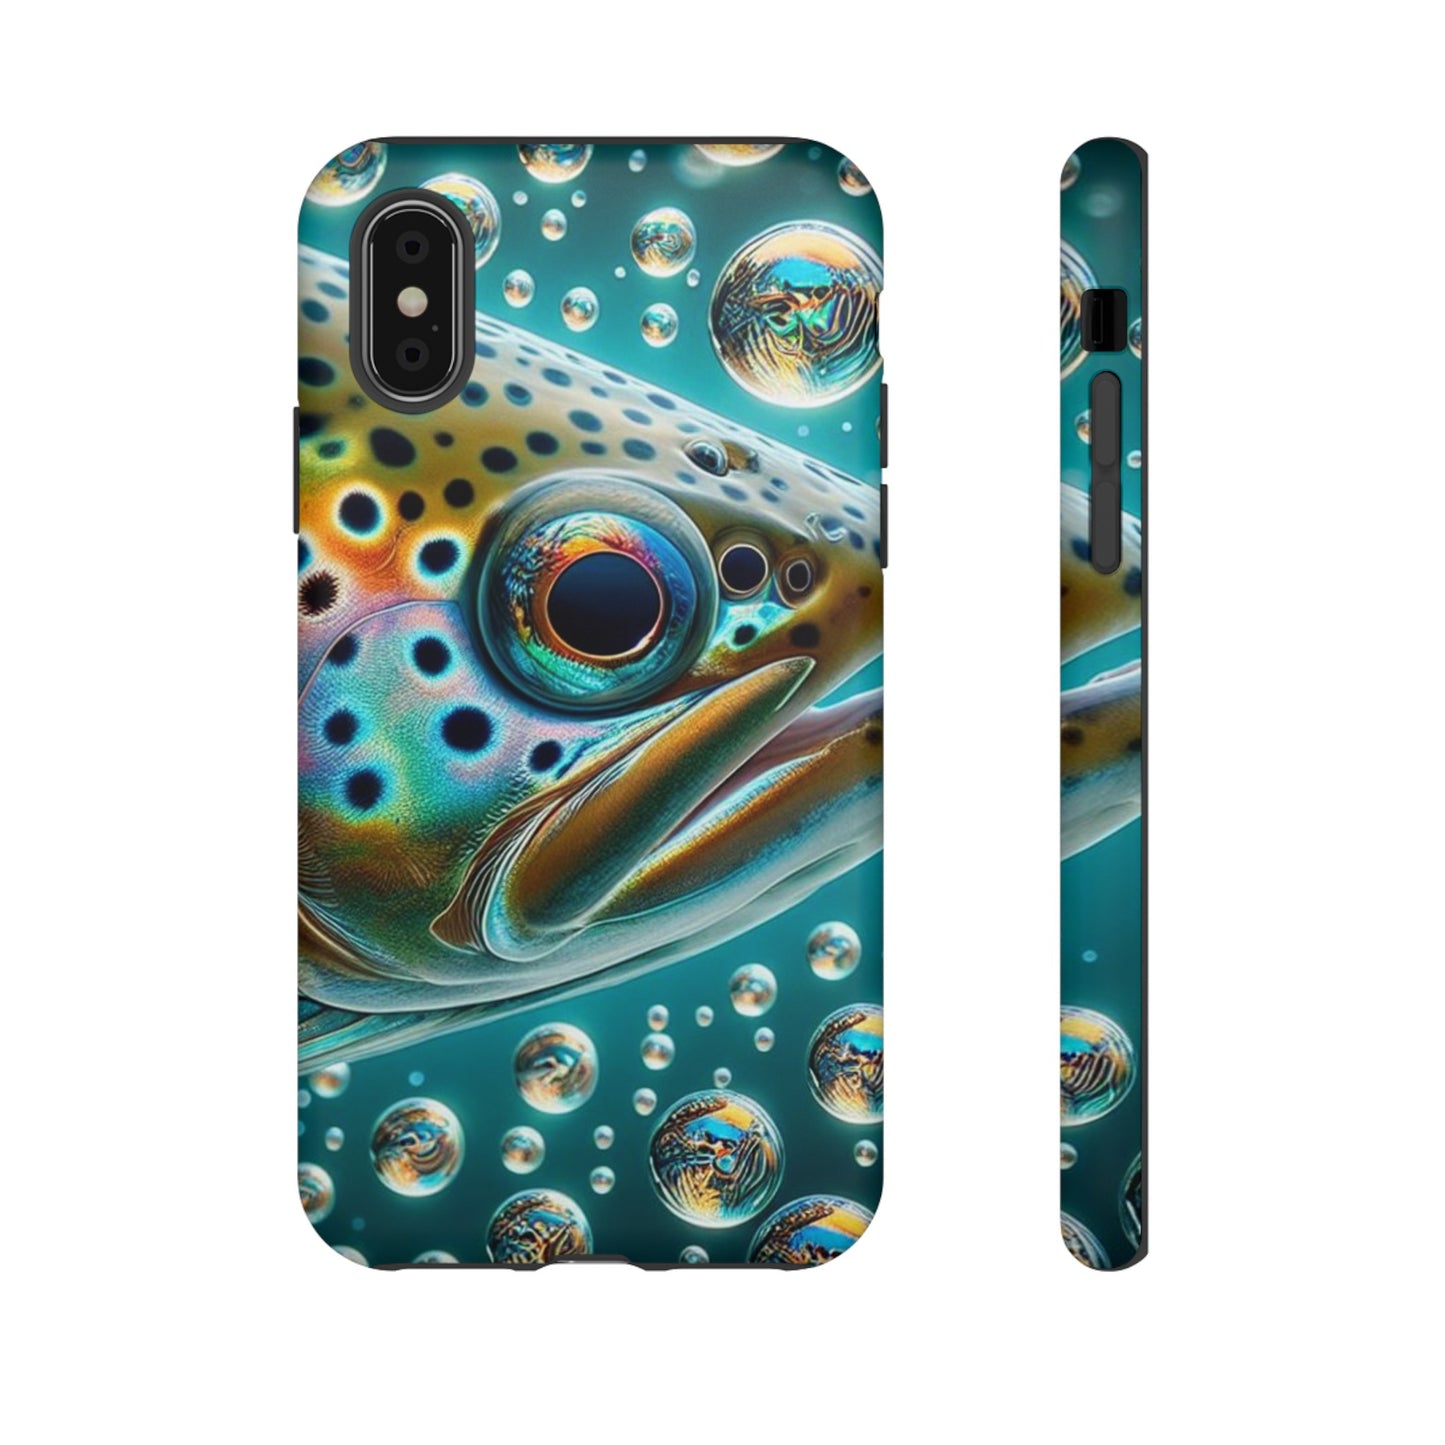 Trout Phone Case, Fishing Phone Case, iPhone Case